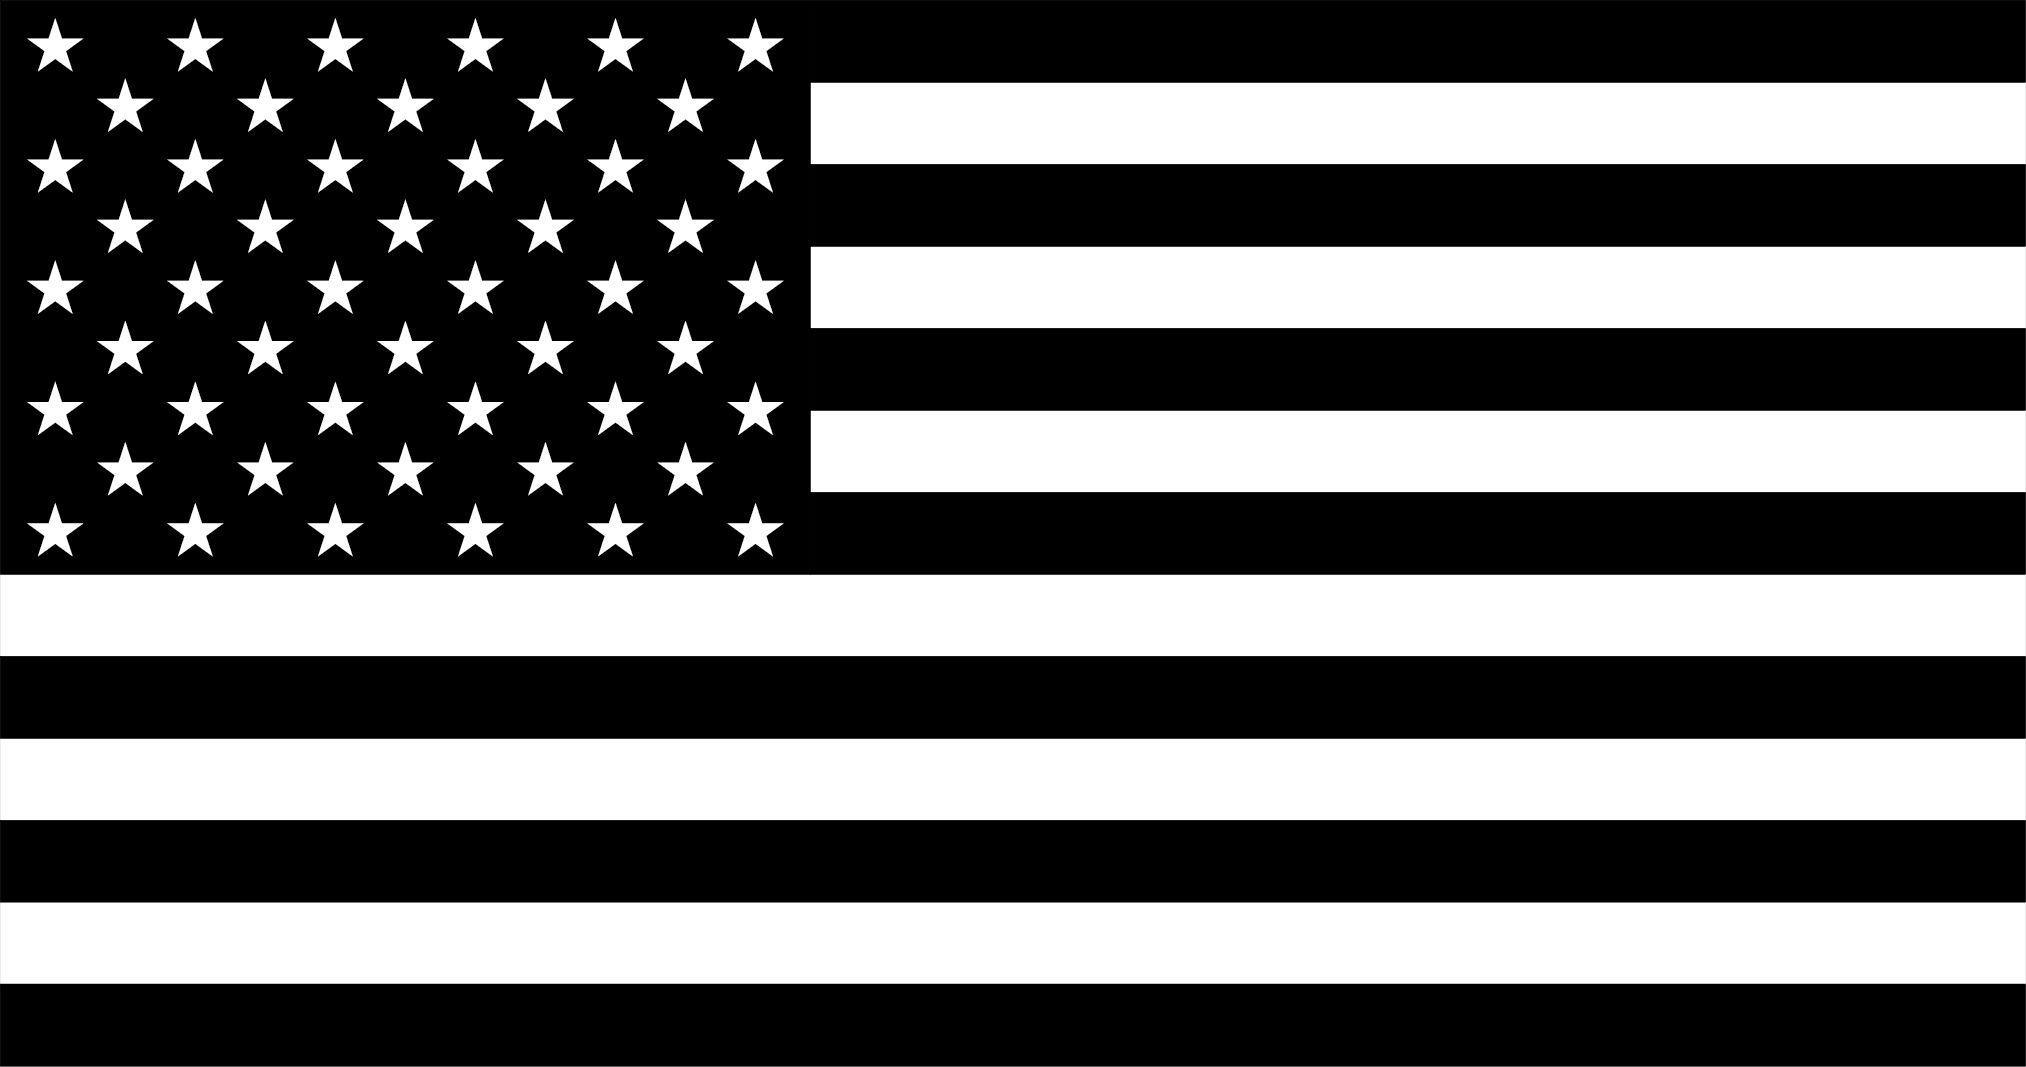 American Flag Black and White Wallpapers - Top Free American Flag Black ...